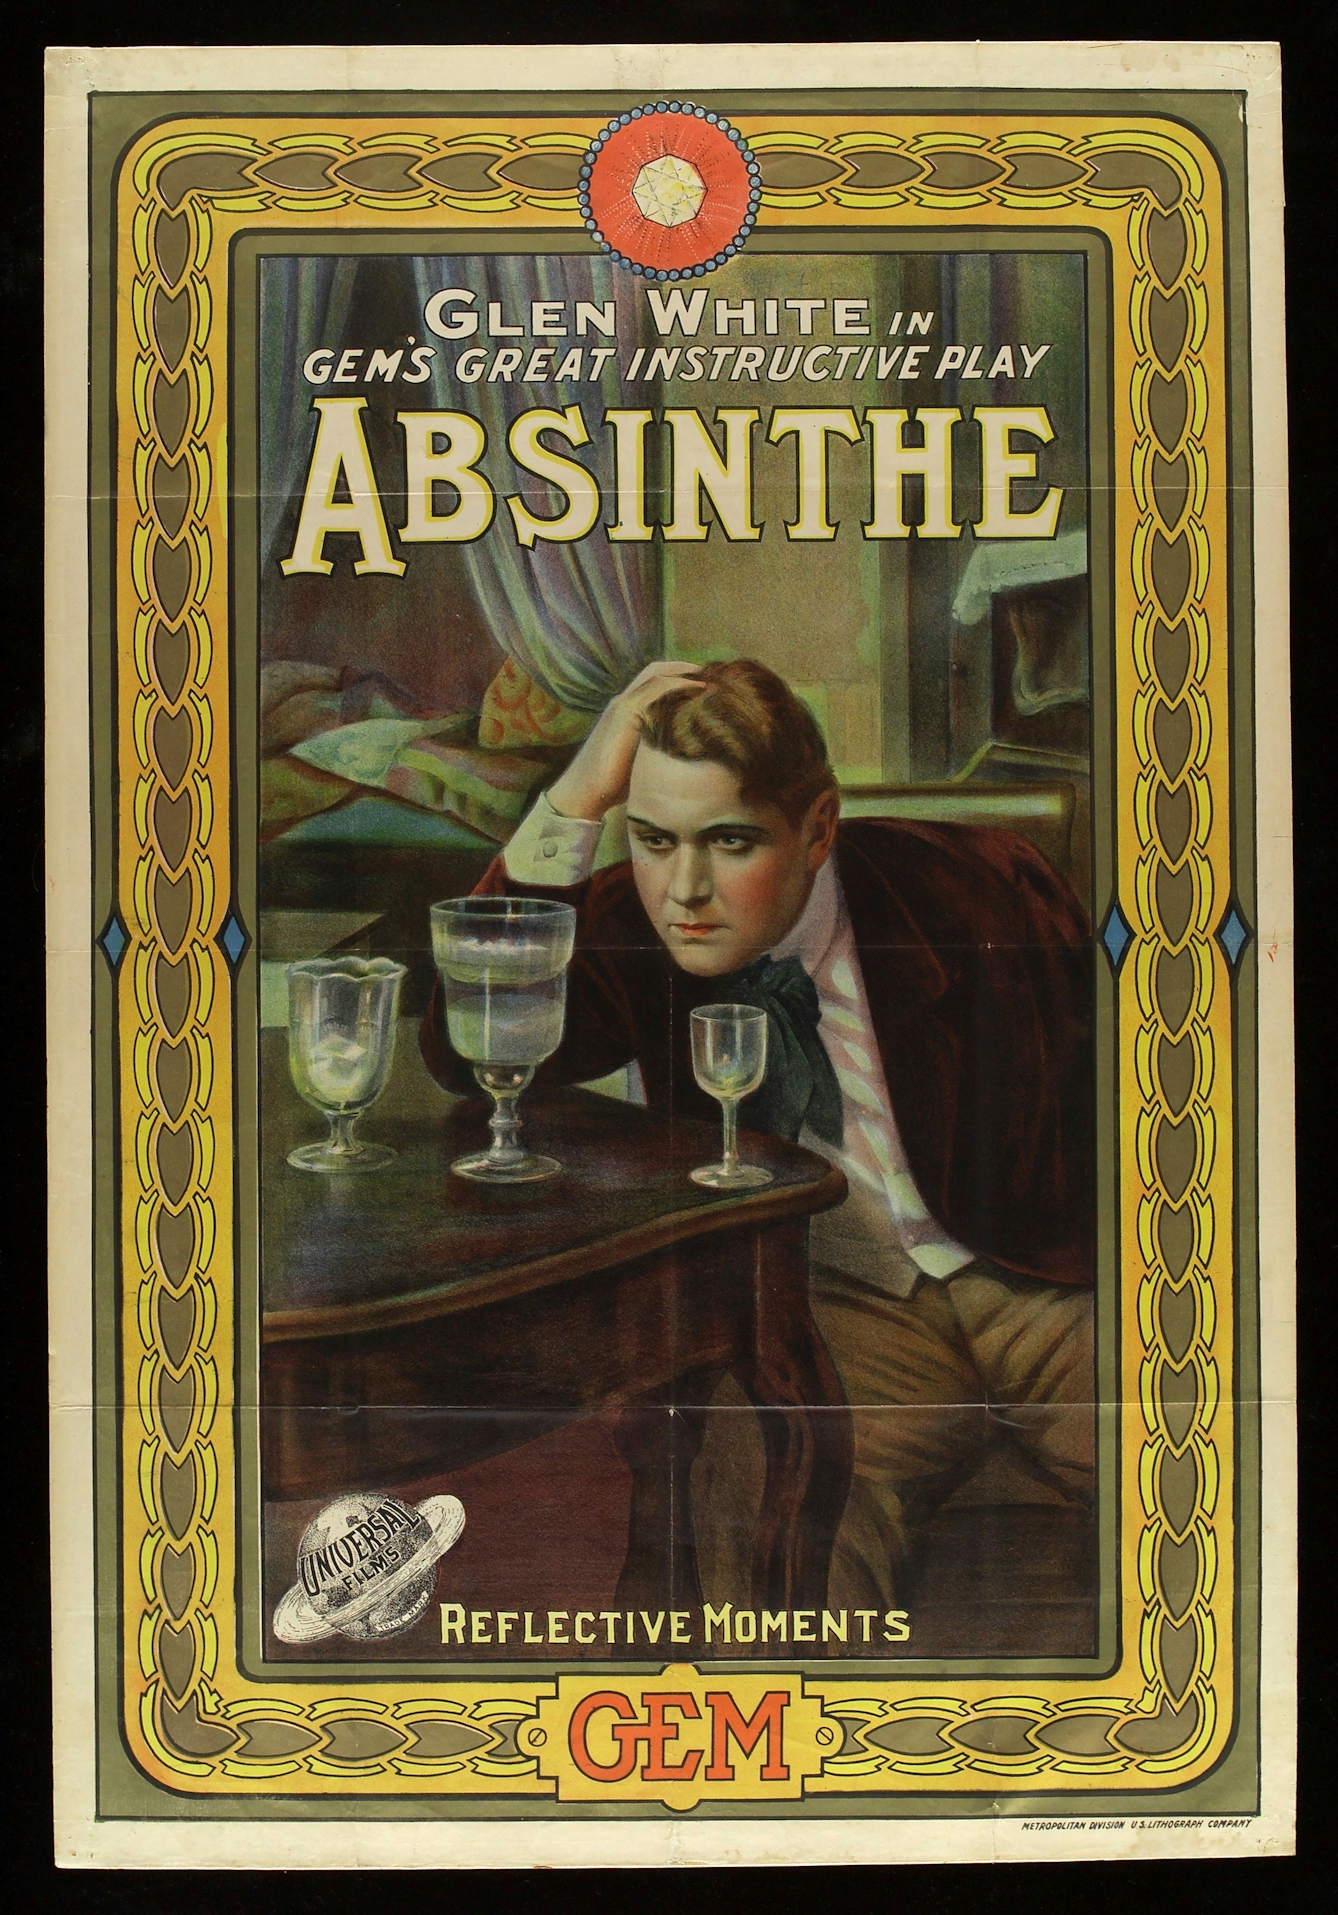 An illustrated poster showing an unhappy-seeming man sitting at a table, with one elbow on the table and his head resting in his hand. There are three glasses of three different sizes on the table.